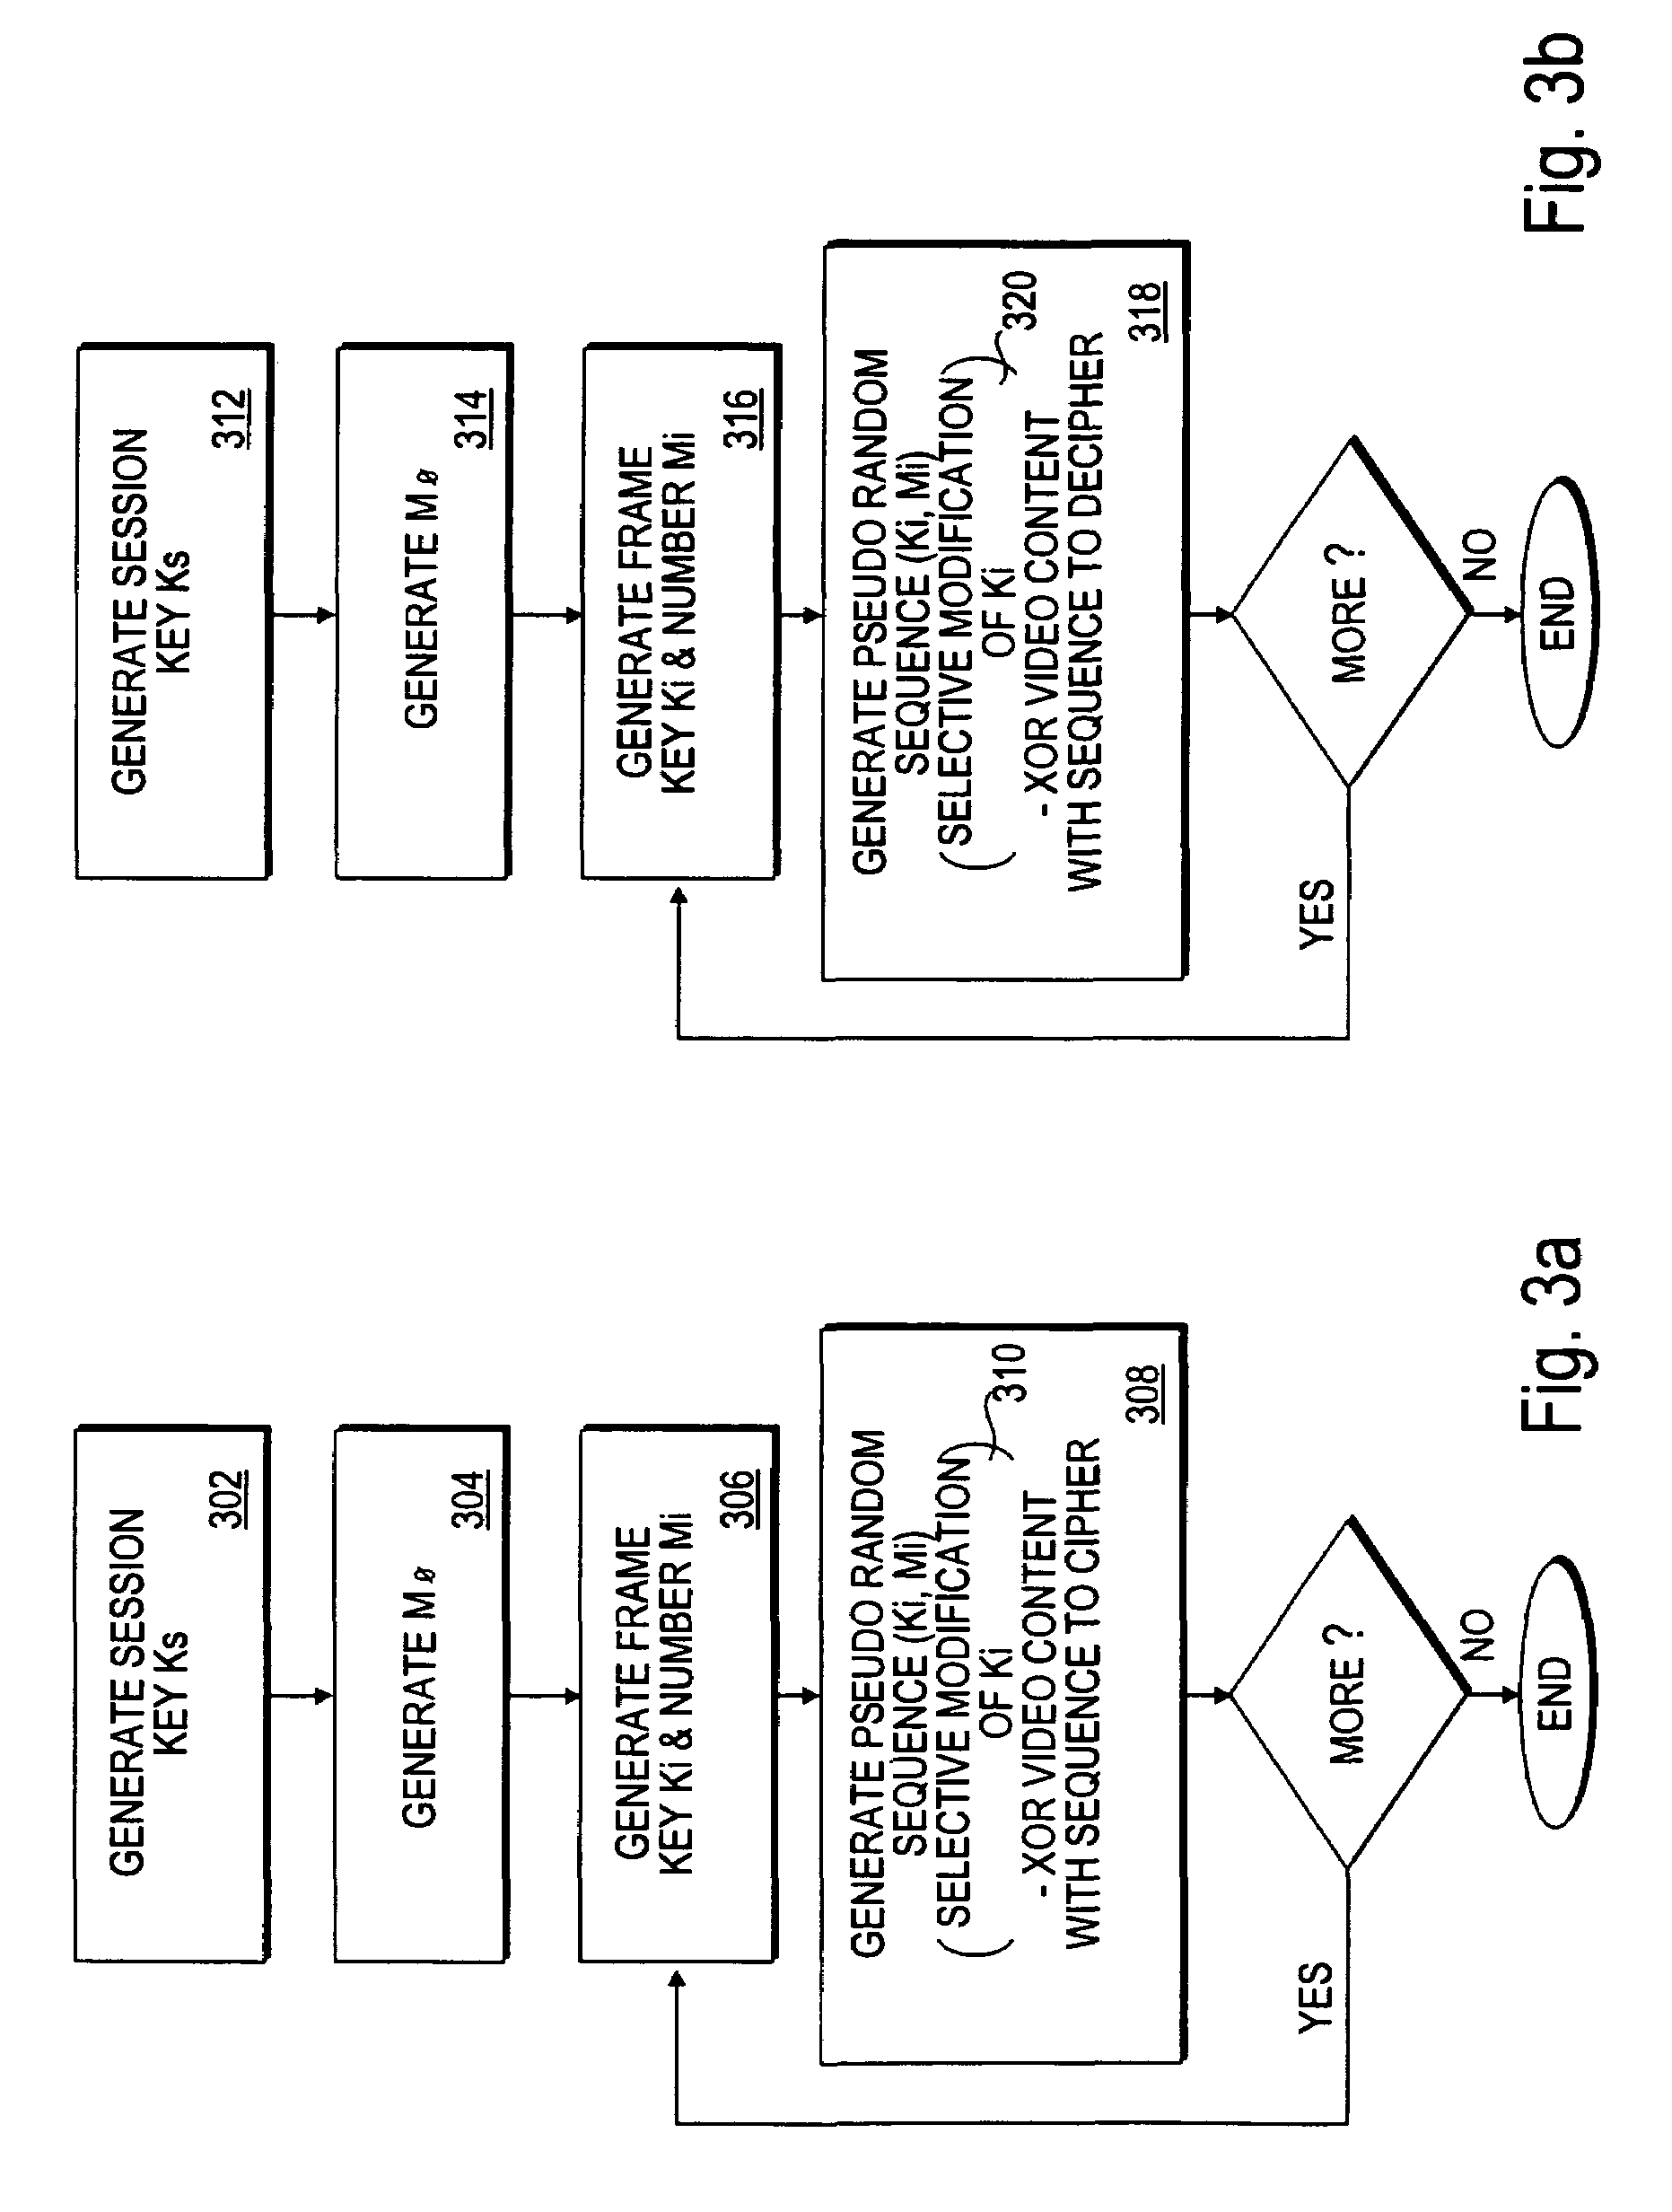 Digital video content transmission ciphering and deciphering method and apparatus